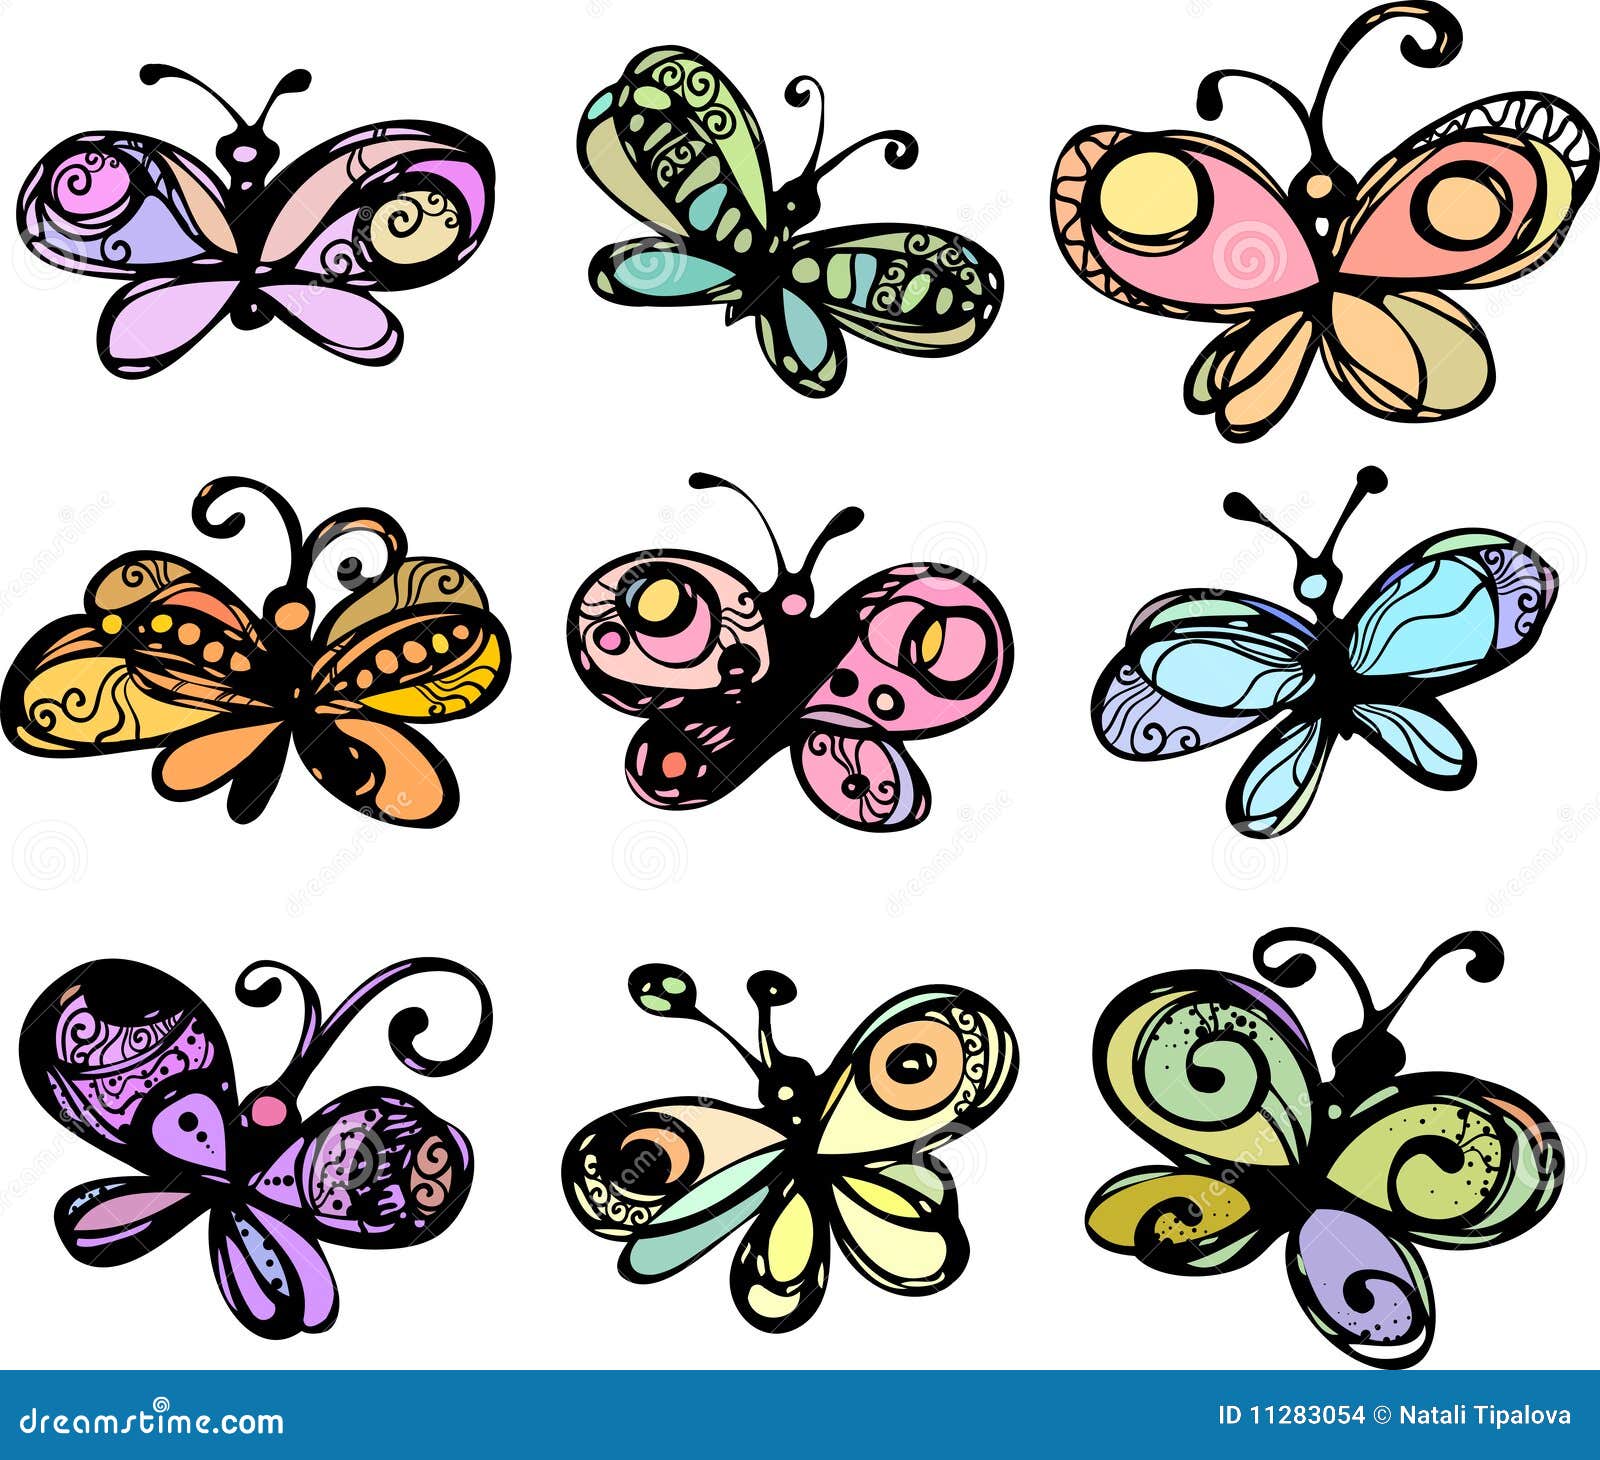 The Image Of The Stylised Butterflies Stock Vector Illustration Of Ornamental Beautiful 11283054